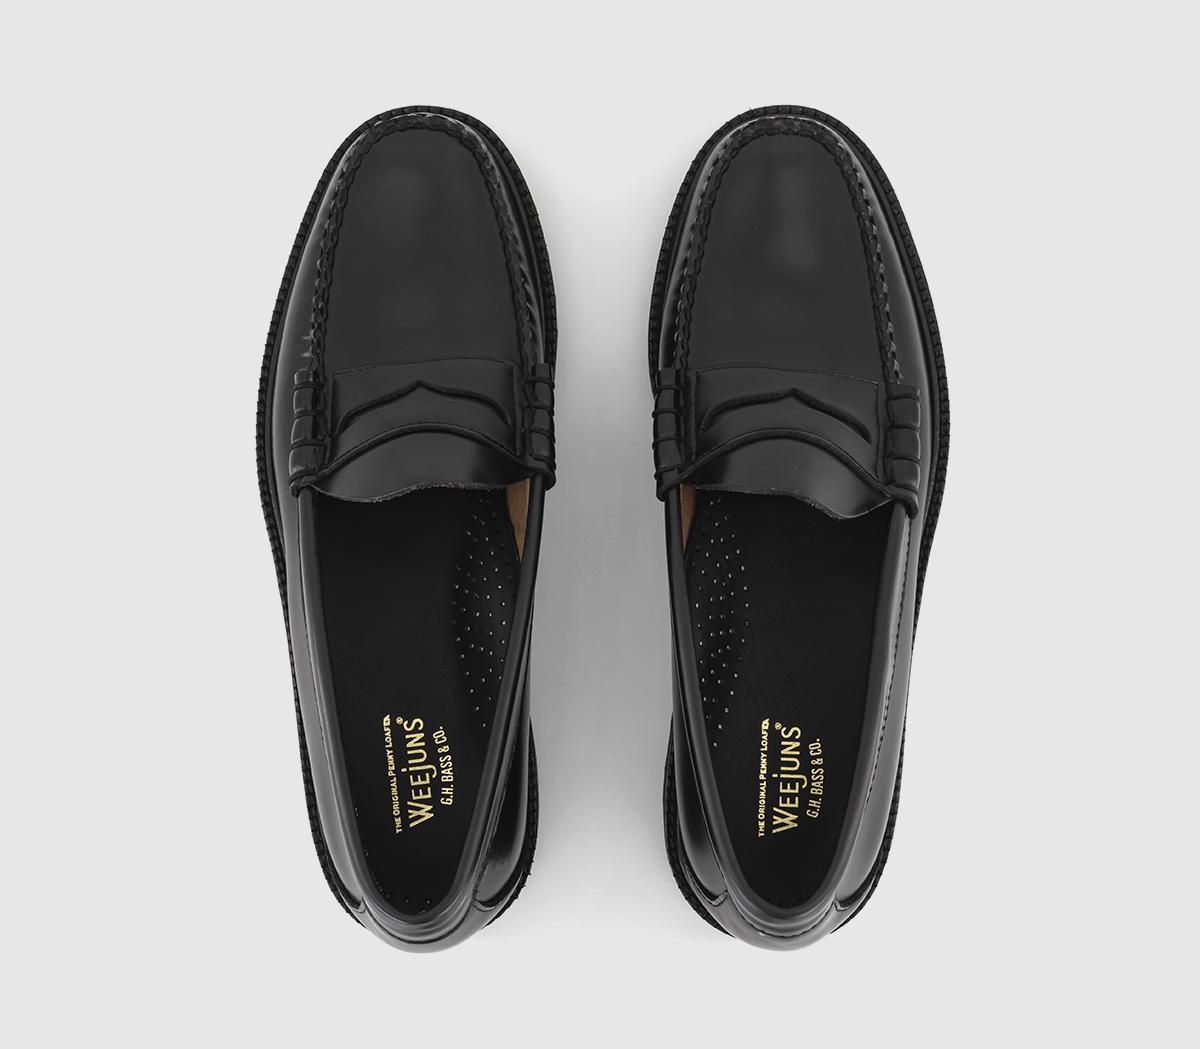 G.H Bass & Co Weejun 90 Larson Penny Loafers Black - Men’s Loafers